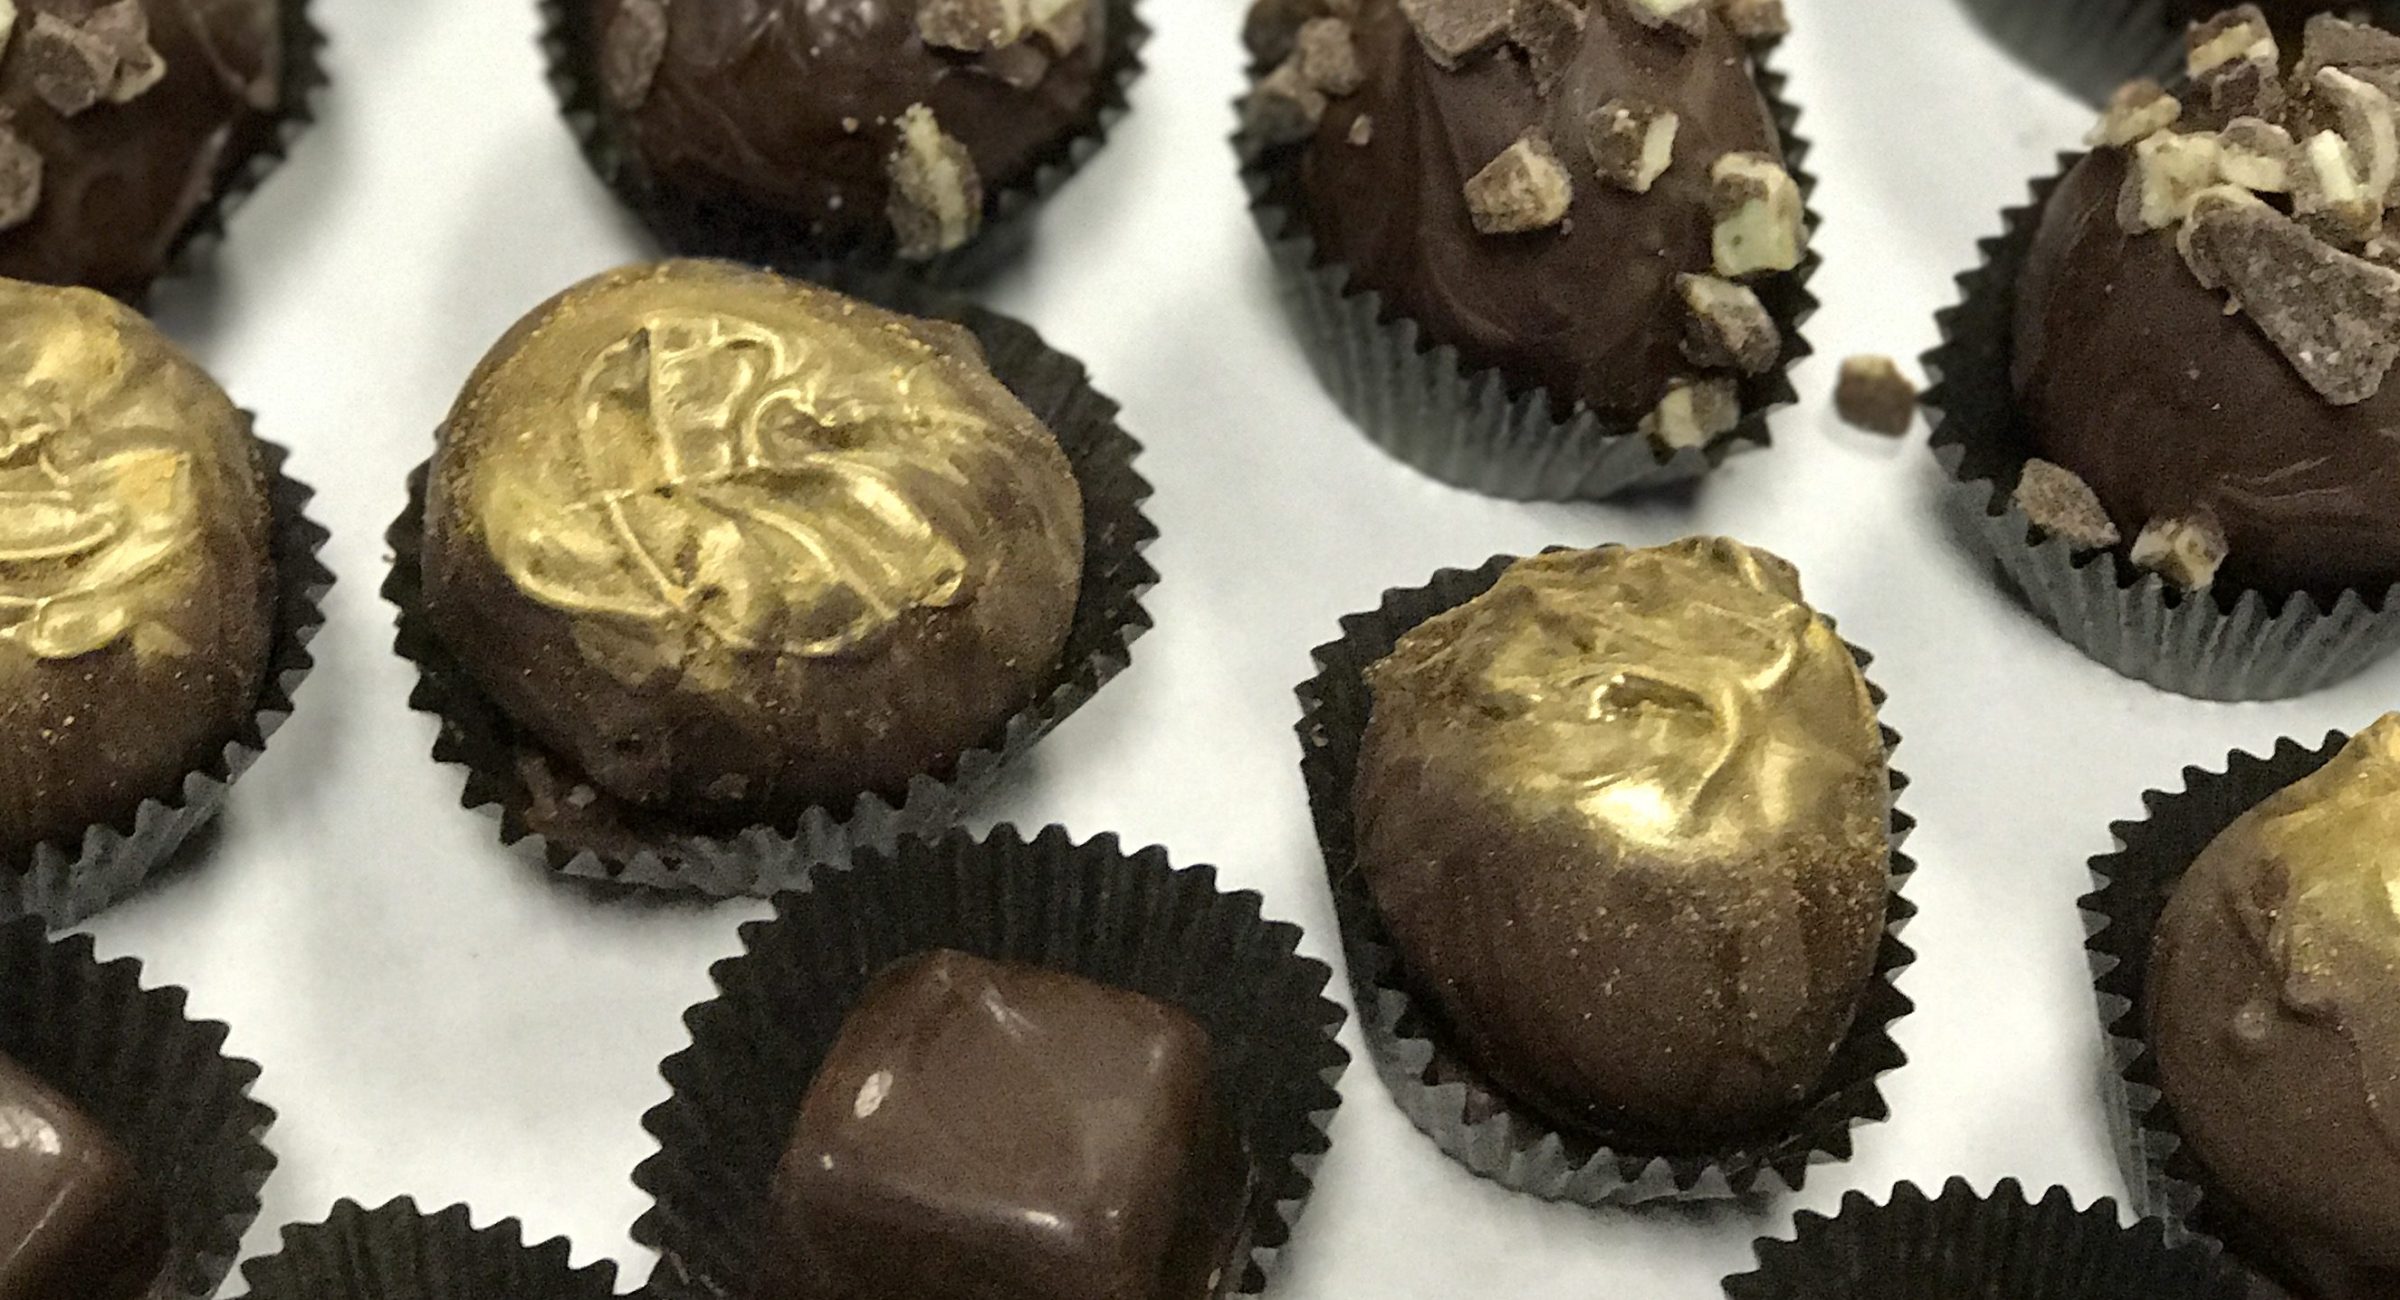 A variety of truffles